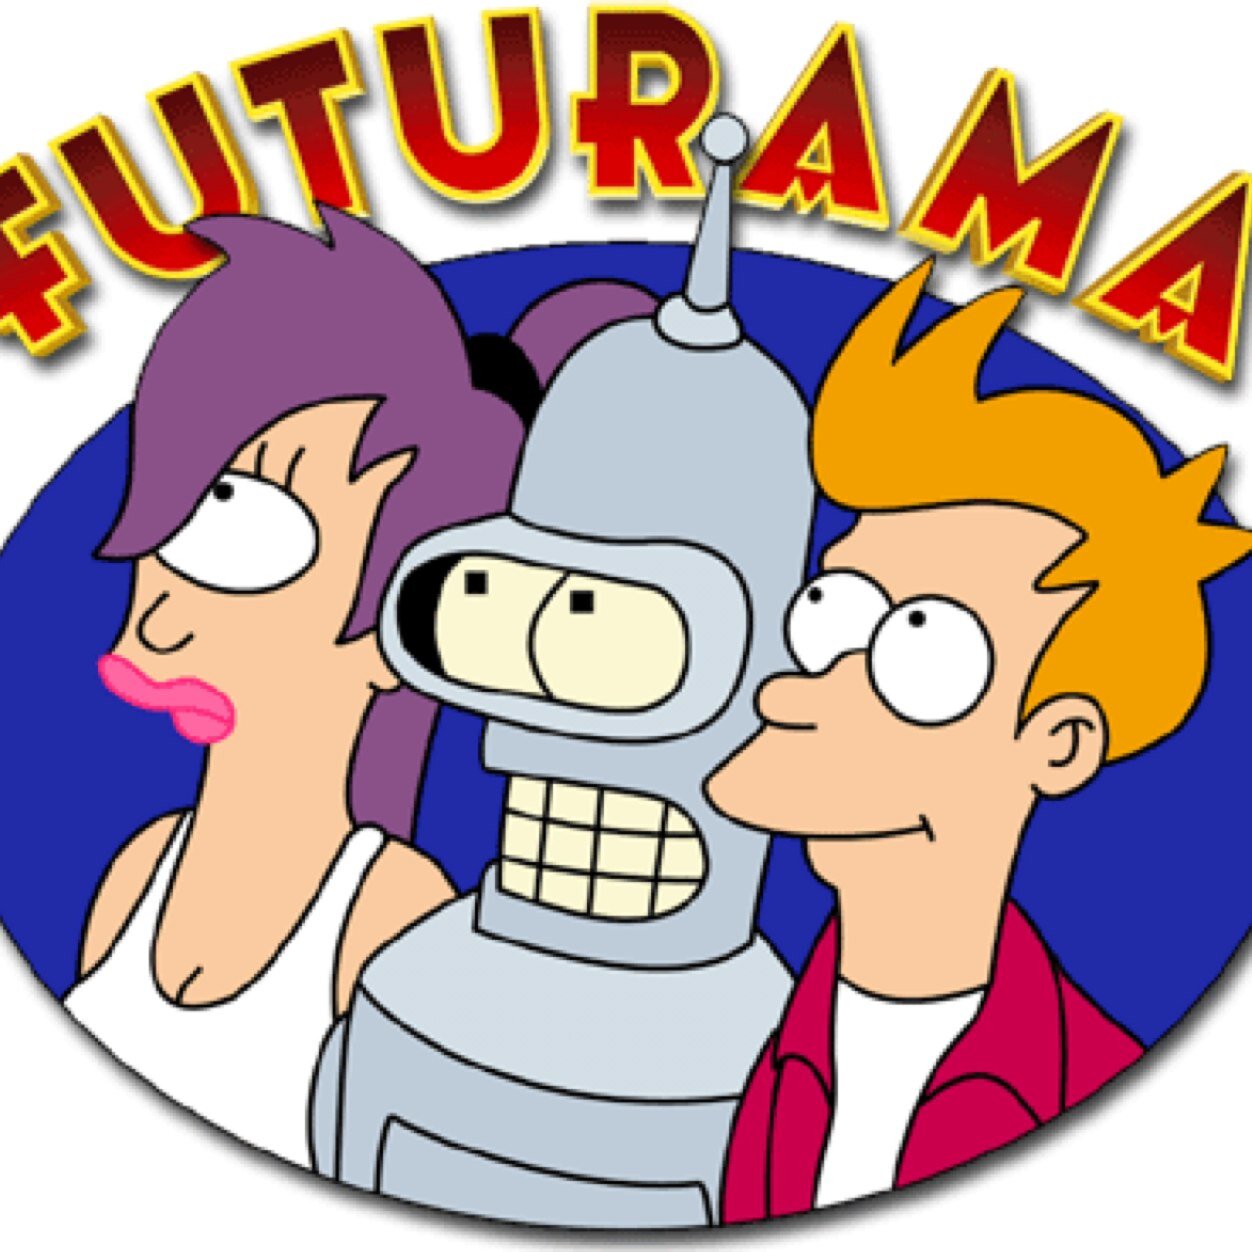 Began a futurama QOTD to re-live some of my (and hopefully your) favourite moments. Some quotes are slightly edited to work with Twitter. Enjoy!